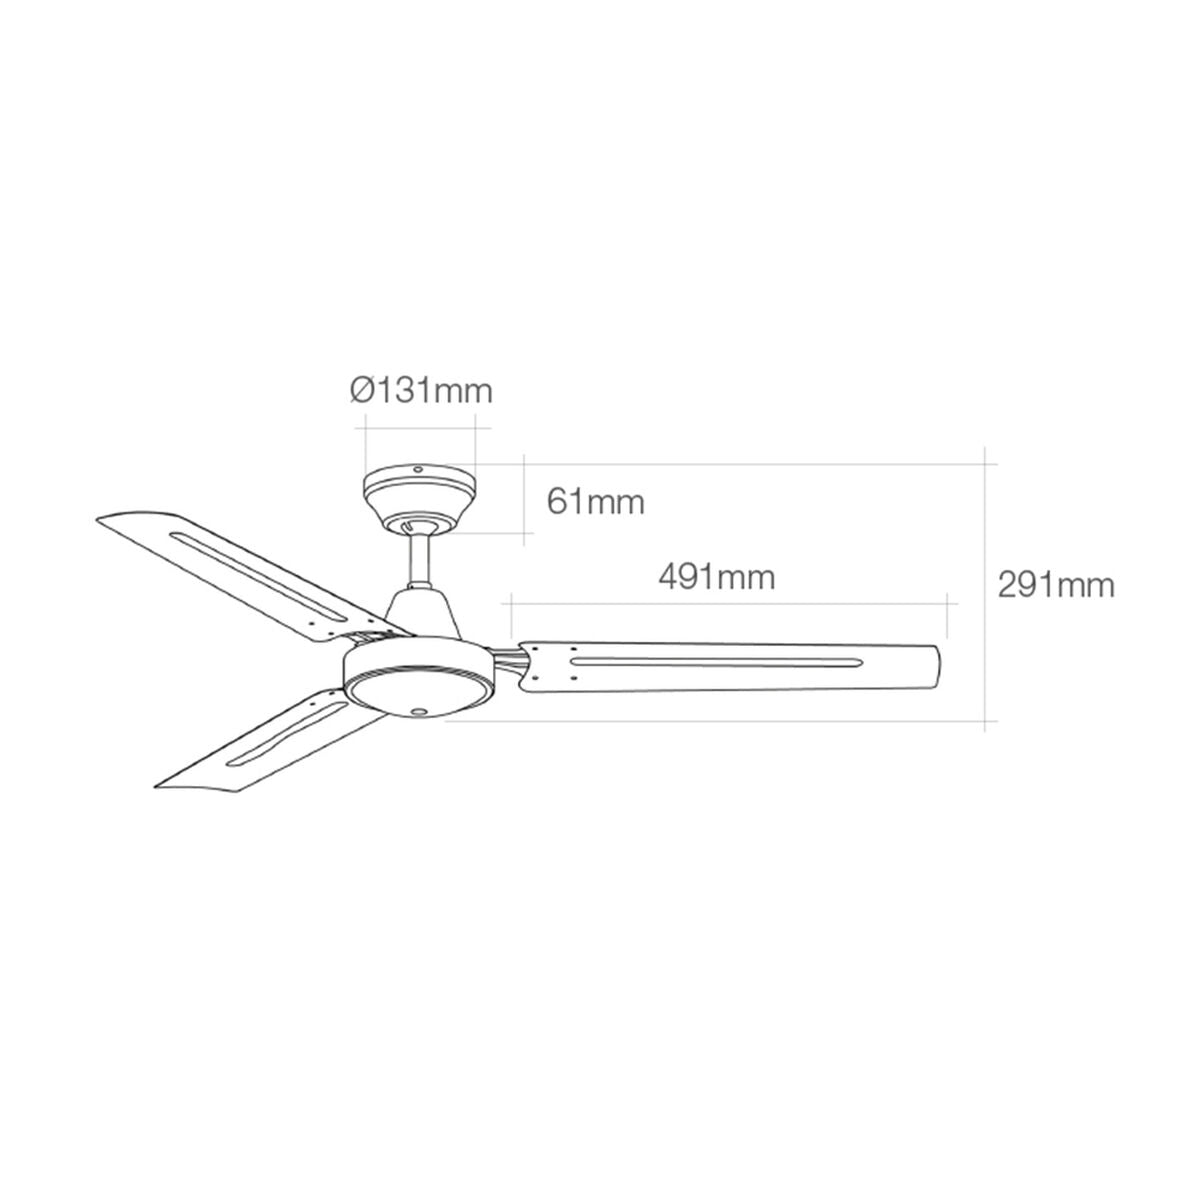 Ceiling Fan EDM 33982 White 60 W Ø 120 cm Mini industrial, EDM, Home and cooking, Portable air conditioning, ceiling-fan-edm-33982-white-60-w-o-120-cm-mini-industrial, Brand_EDM, category-reference-2399, category-reference-2450, category-reference-2451, category-reference-t-19656, category-reference-t-21087, category-reference-t-25217, Condition_NEW, ferretería, Price_50 - 100, summer, RiotNook